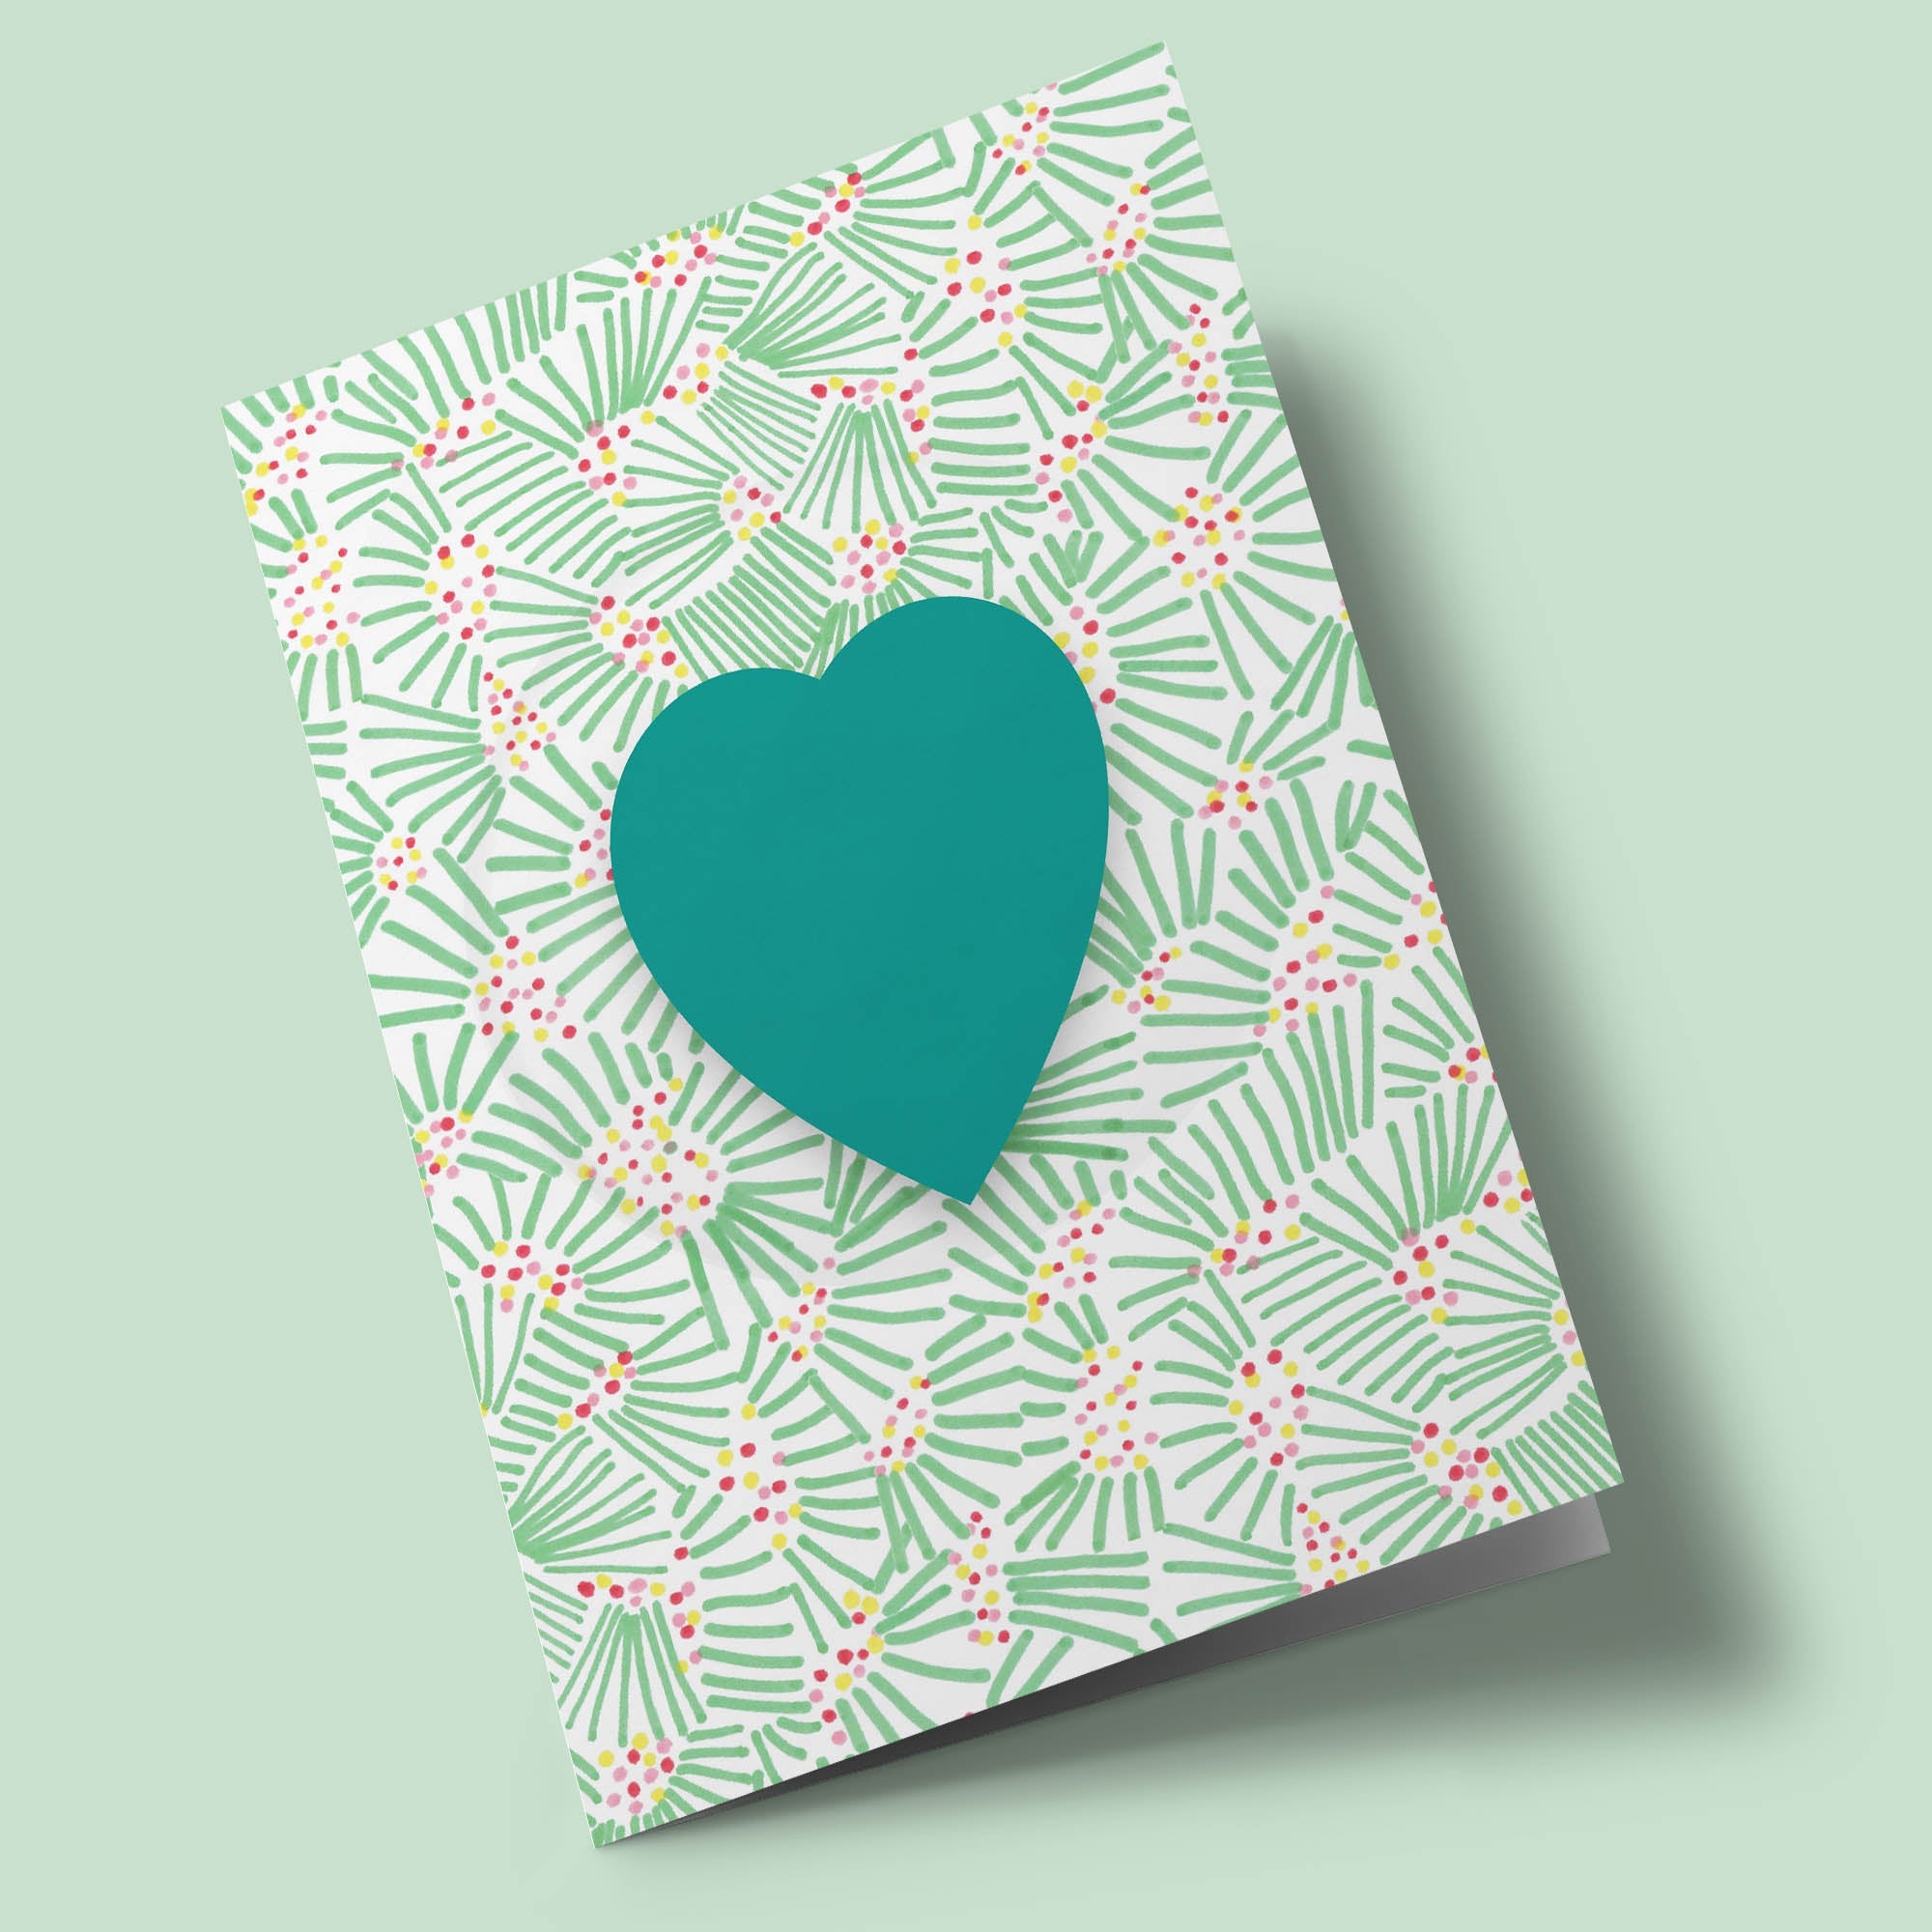 Plantable Heart - Blackground Pattern of Lines and Polka Dots